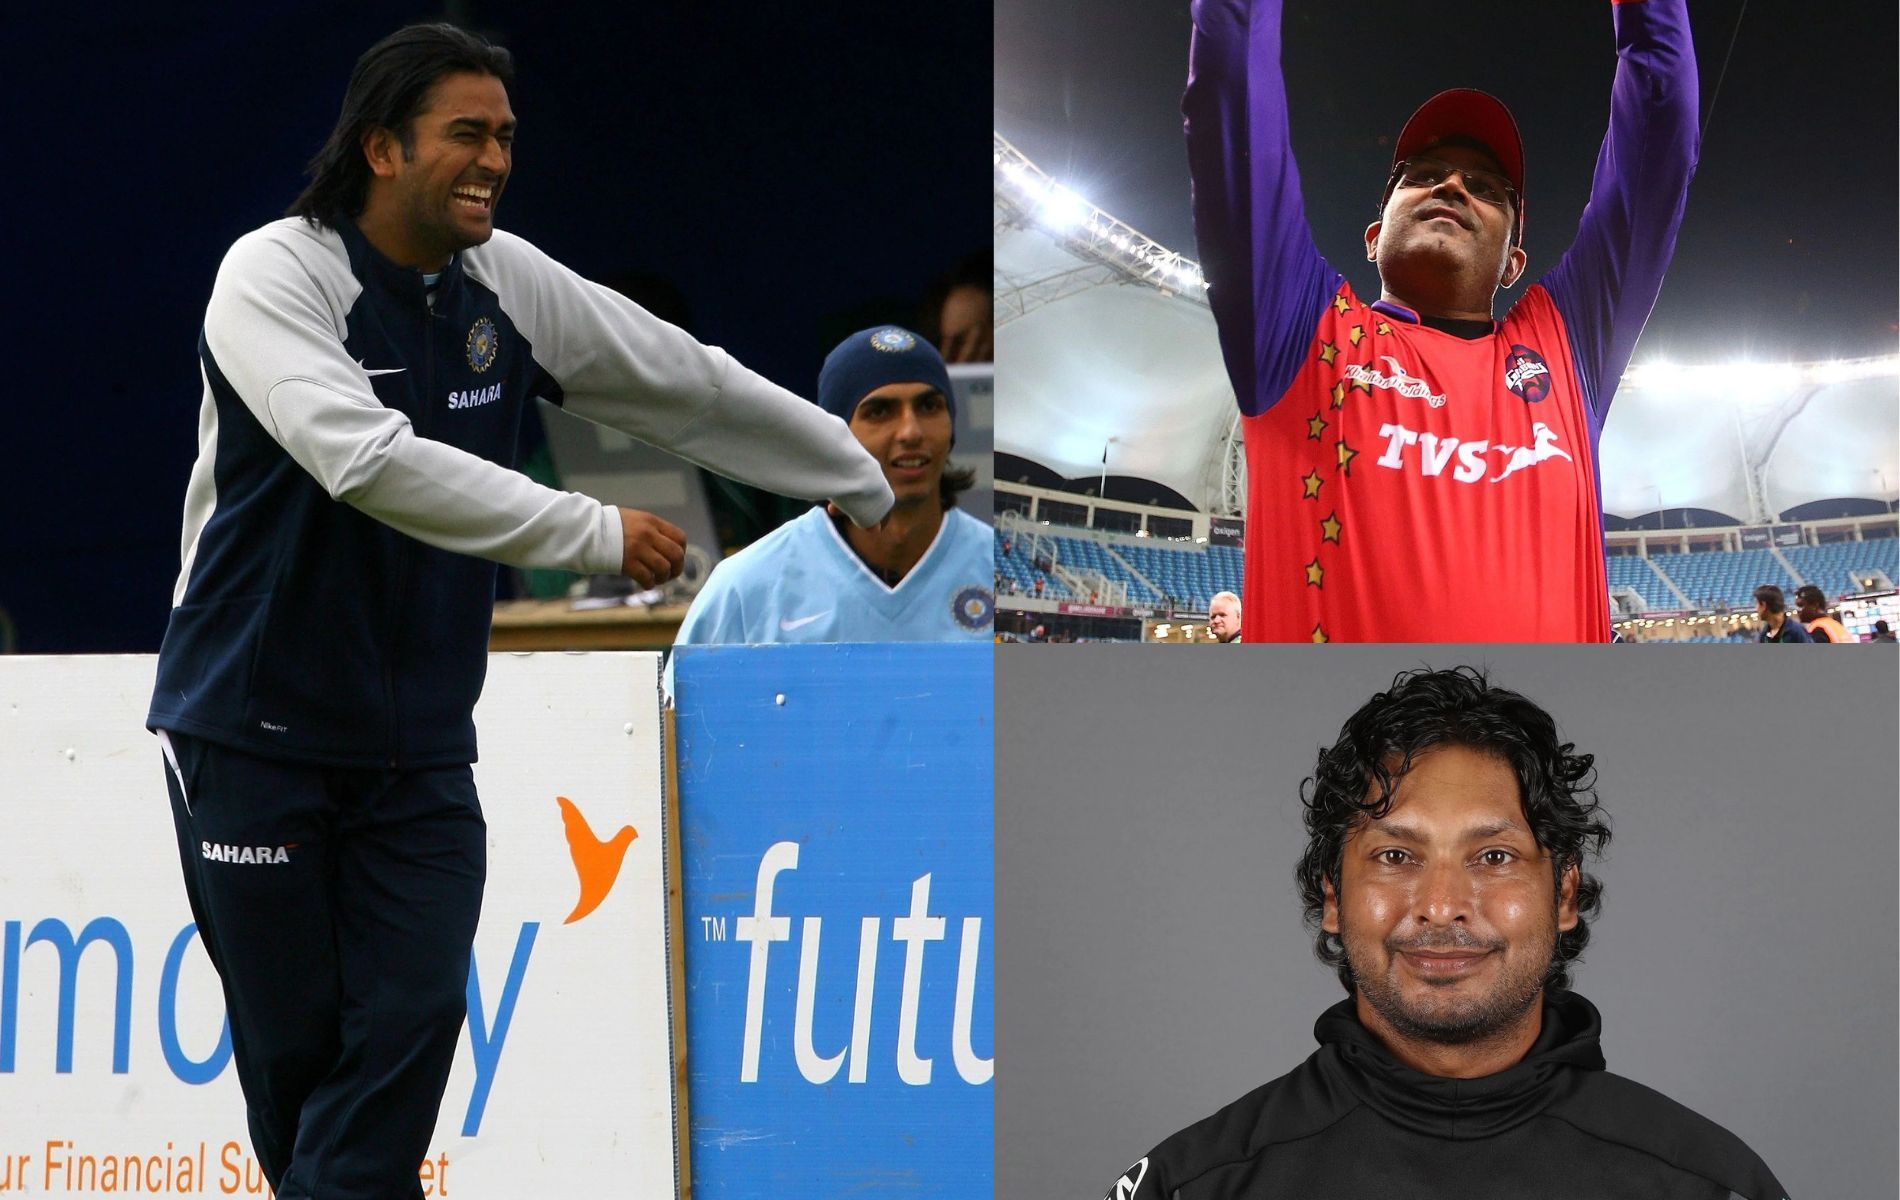 MS Dhoni (left), Virender Sehwag (top right) and Kumar Sangakkara (bottom right). All pics: Getty Images